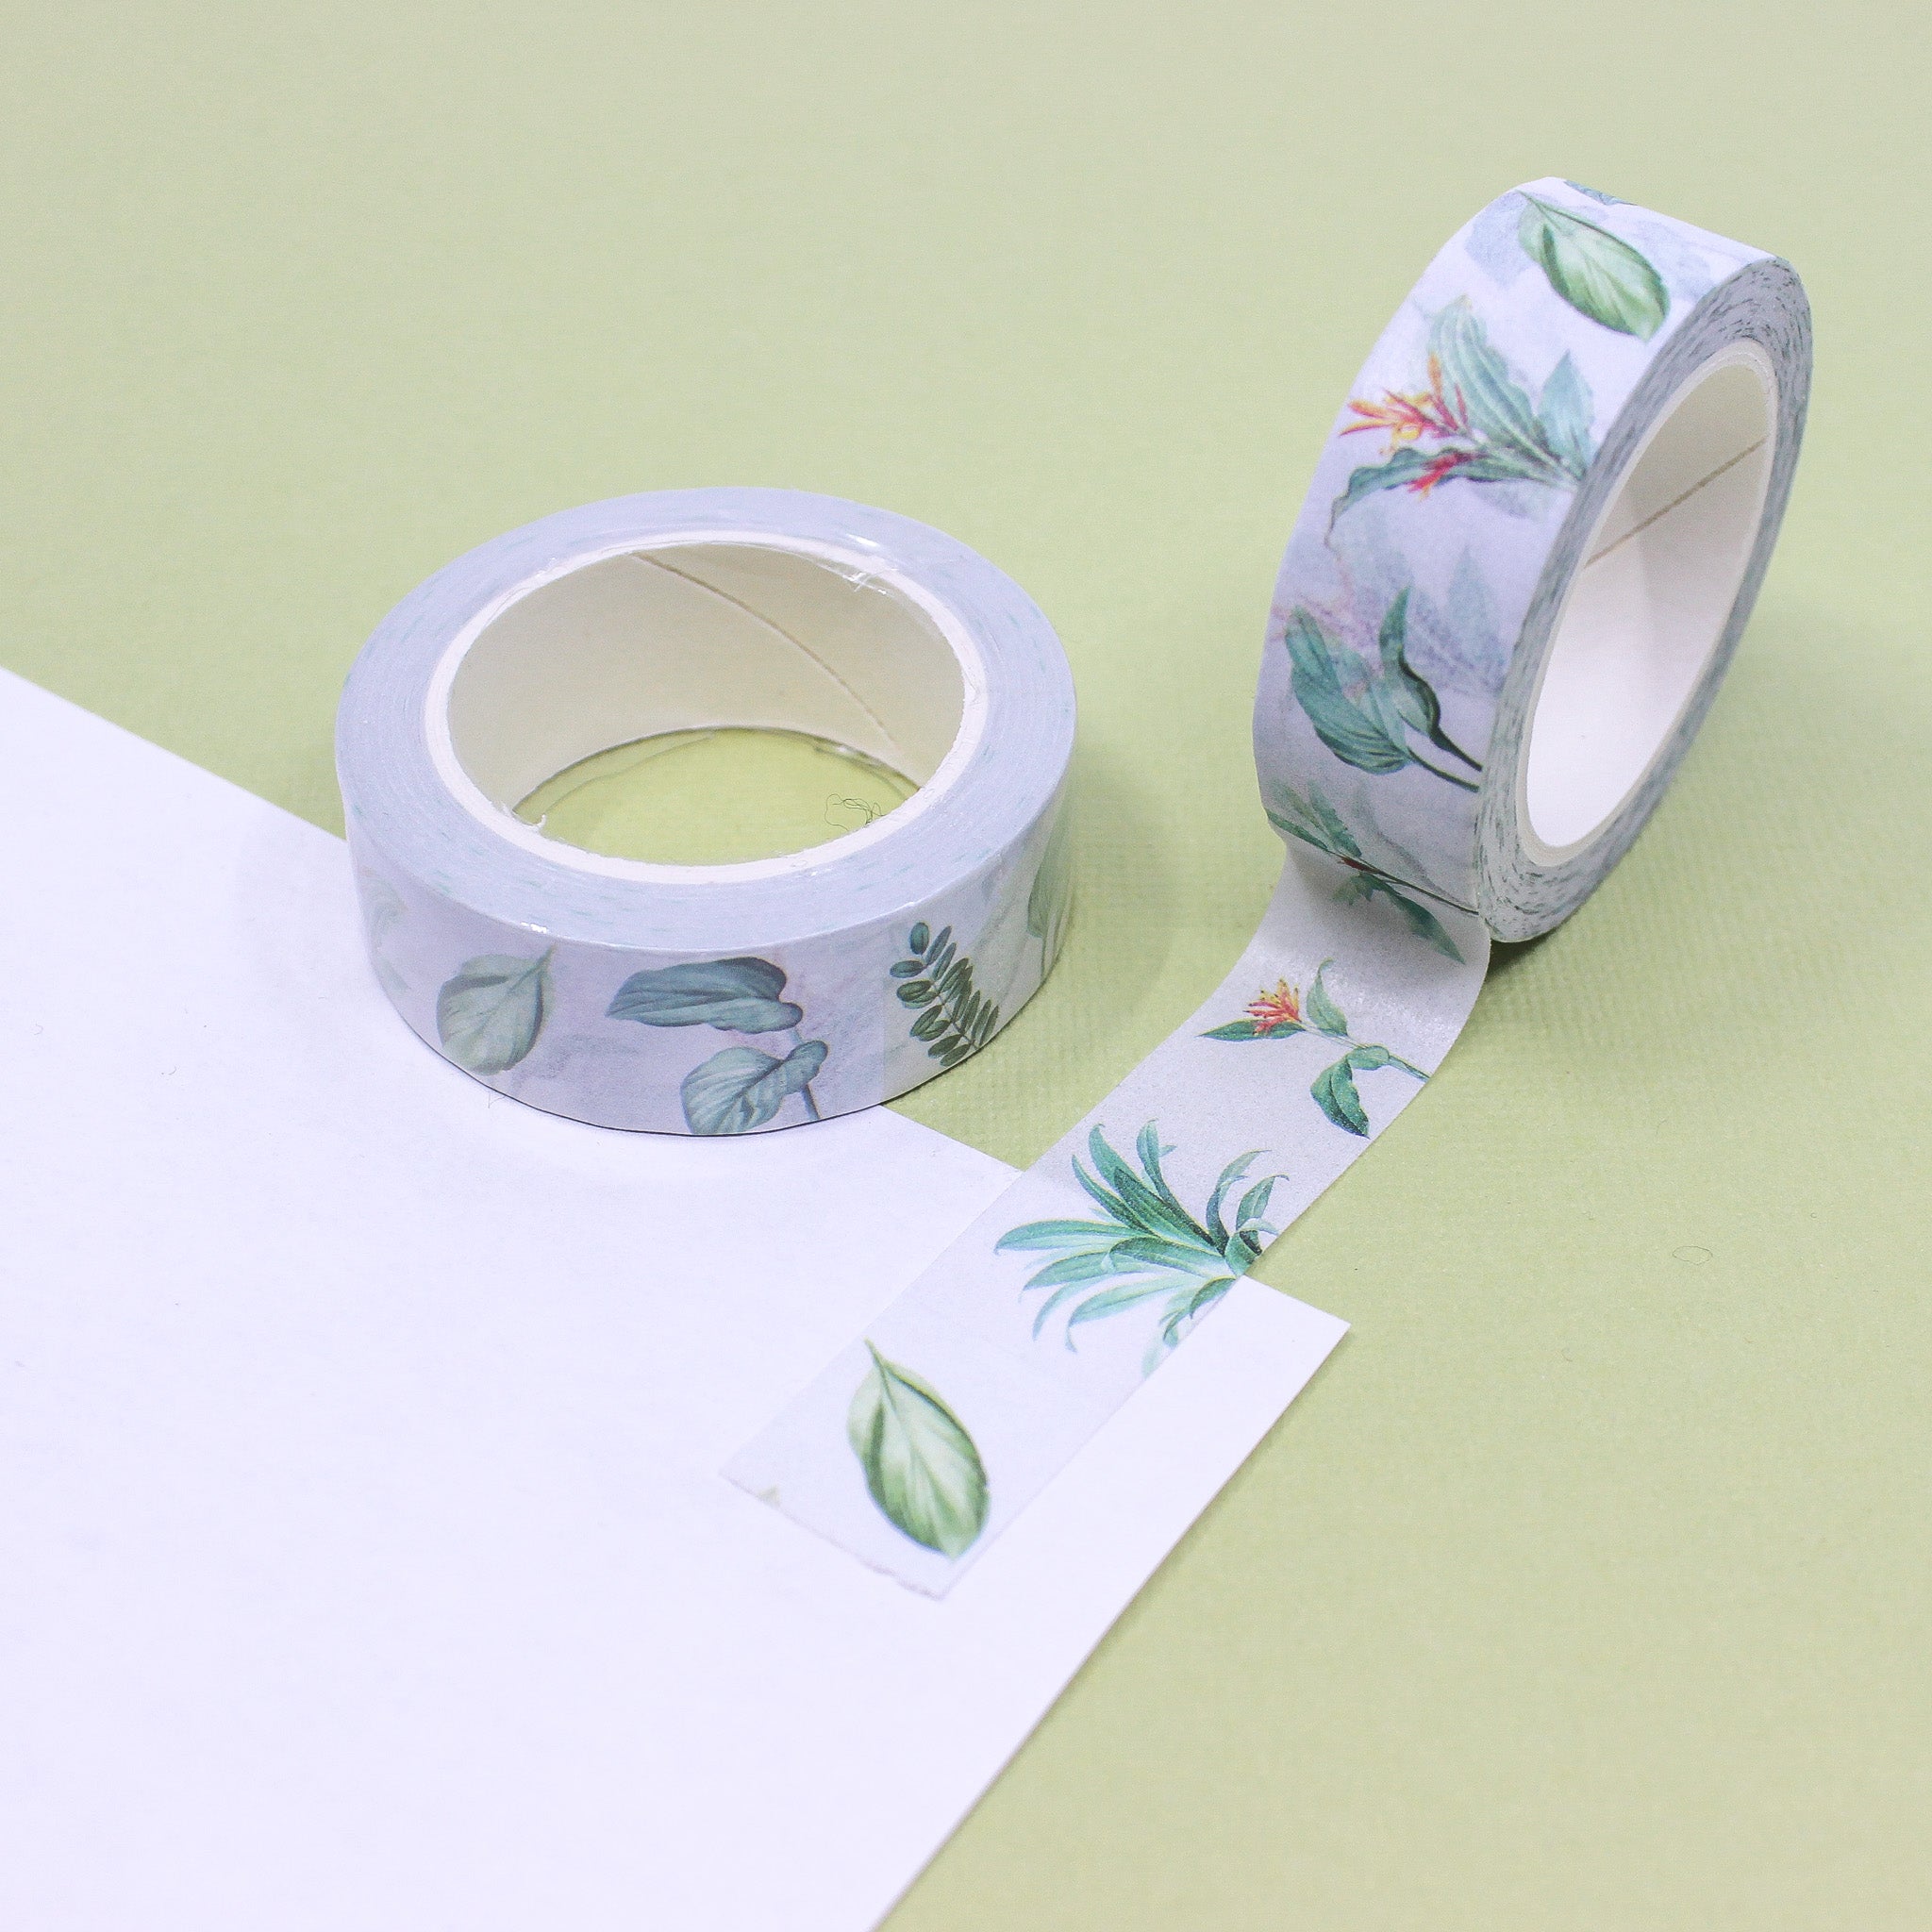 This is a birds of paradise flowers pattern washi tape from BBB Supplies Craft Shop